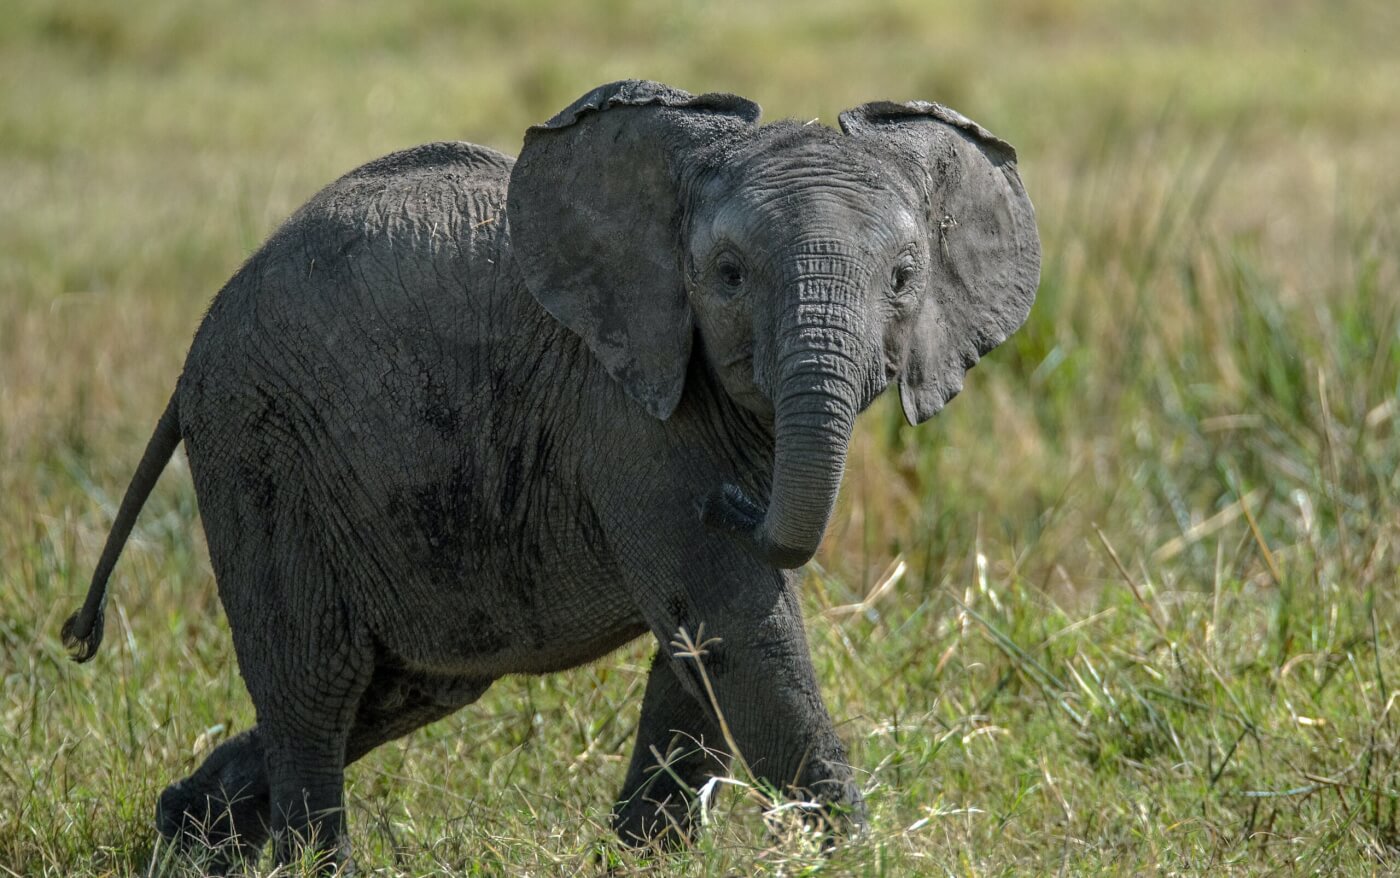 Great News: Keeping Elephants at Zoos or Safari Parks to Be Banned!